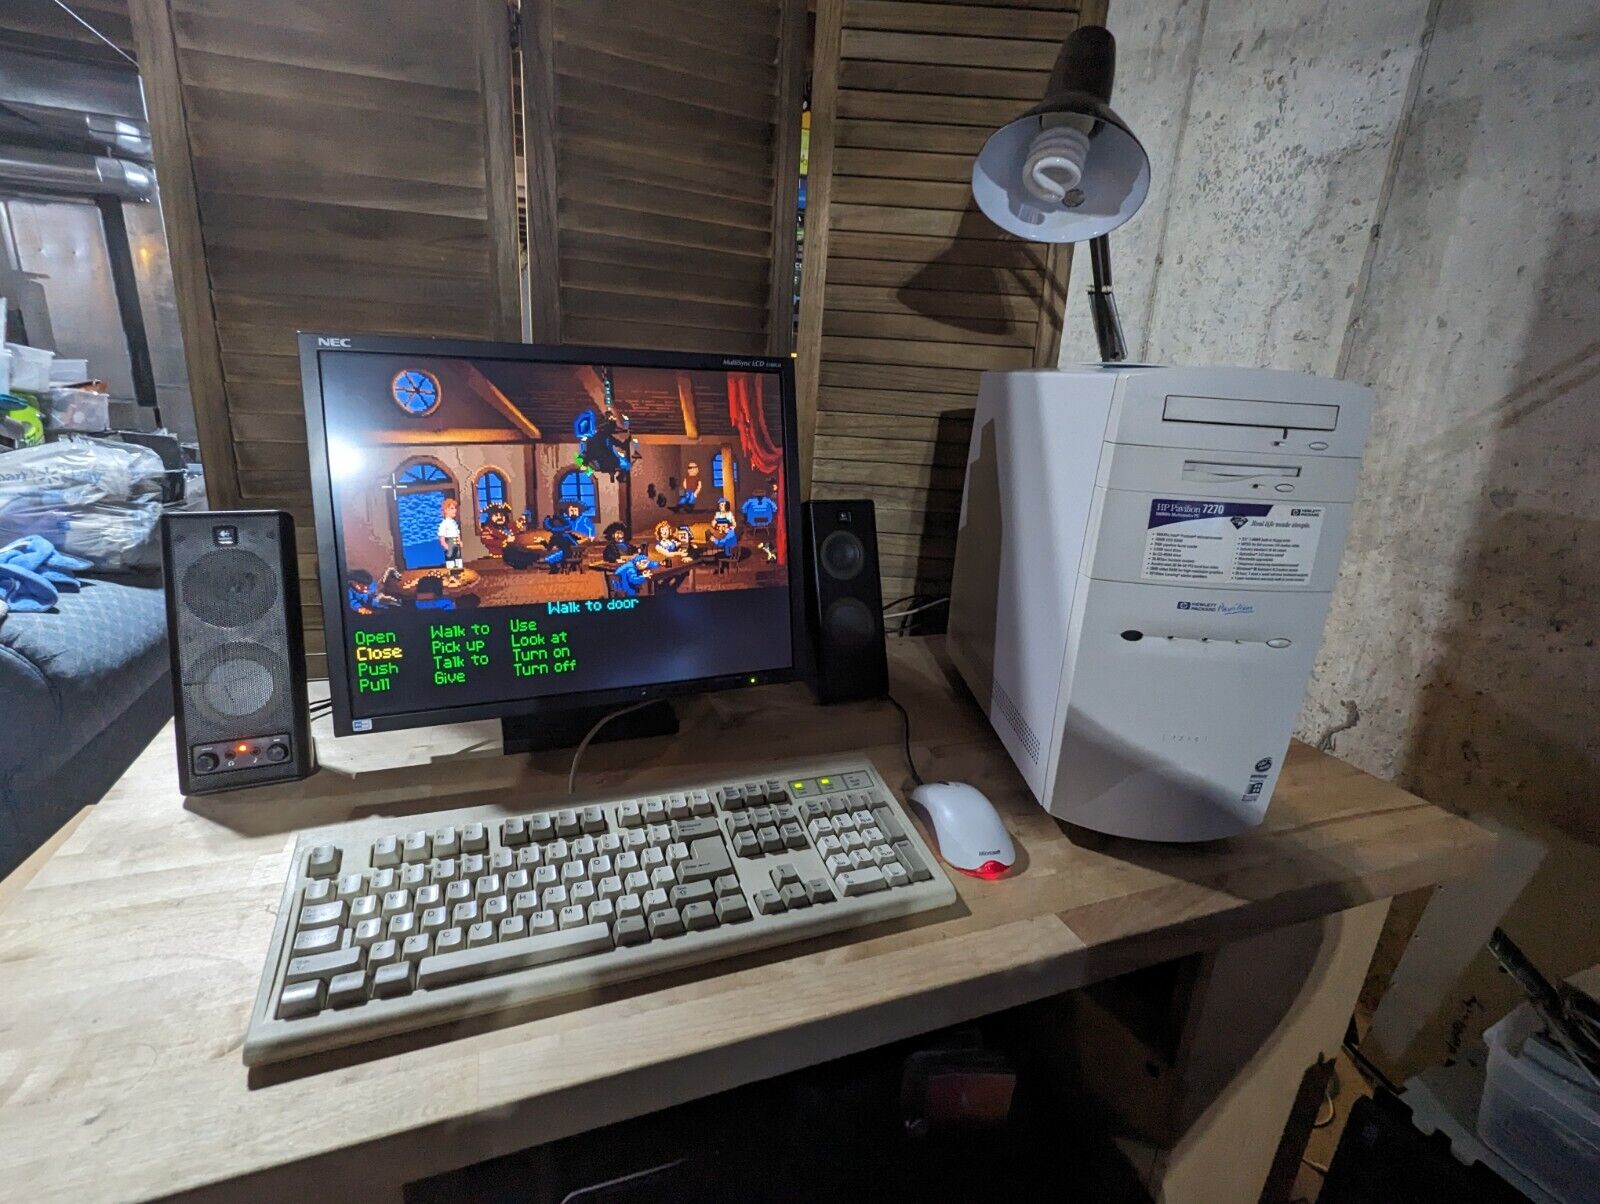 HP Pavilion 7270 - Early Windows 95 / DOS Gaming PC Vintage